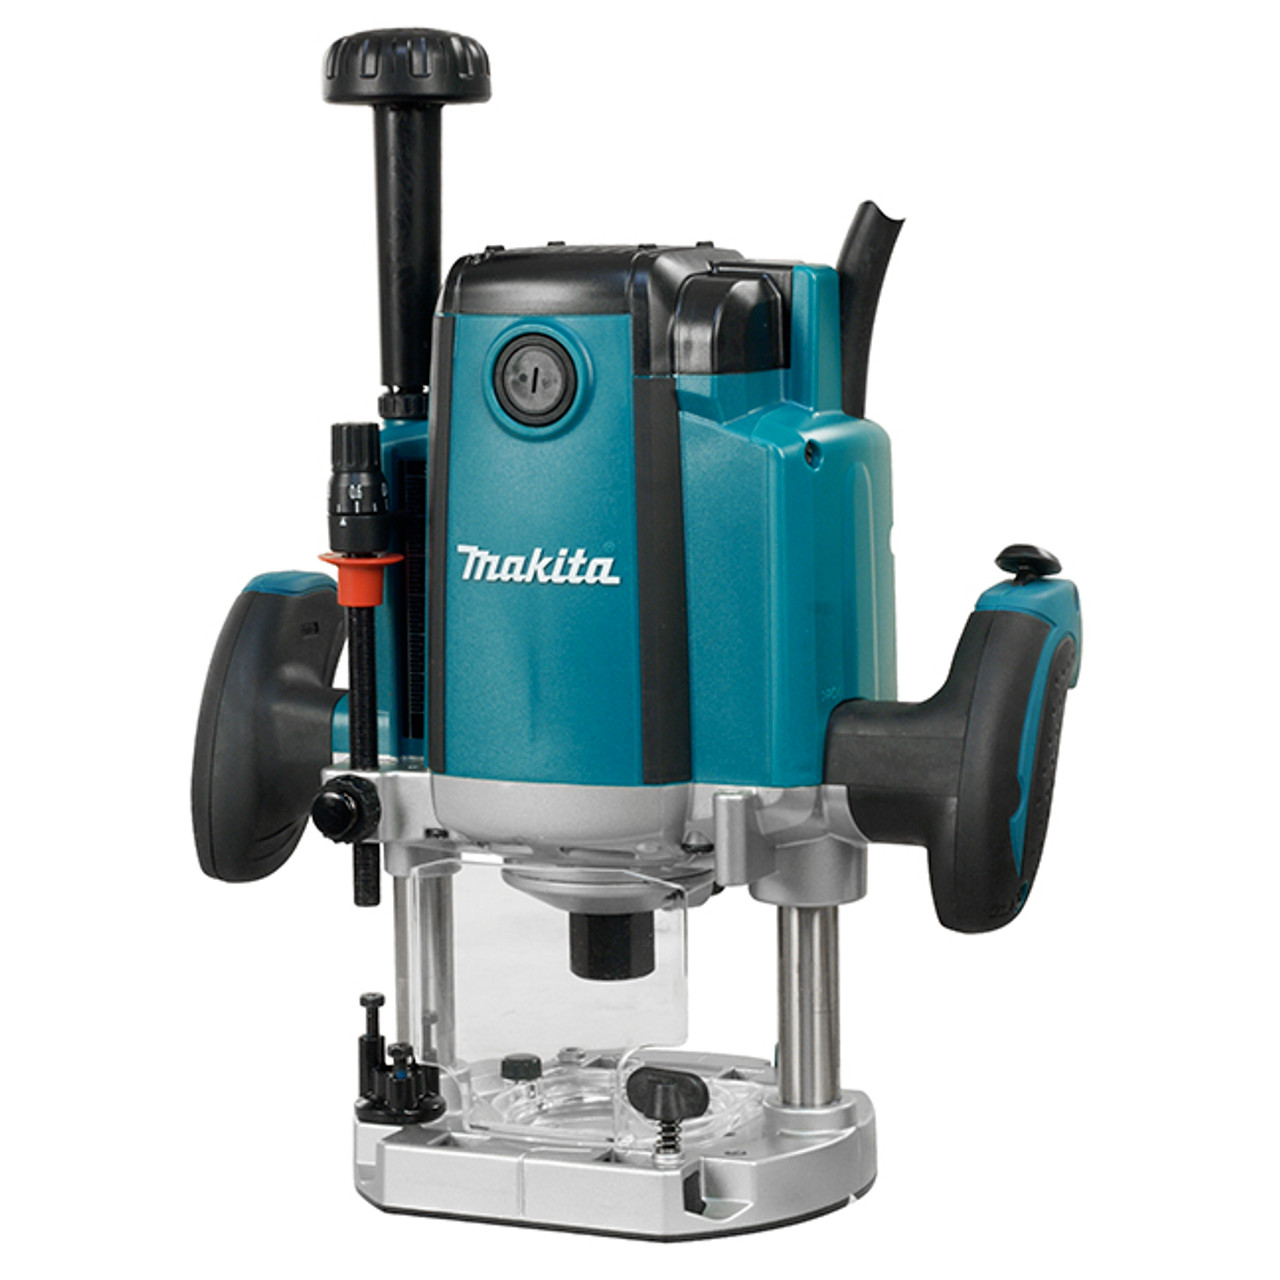 Makita RP1801F 3-1/2 Plunge Router